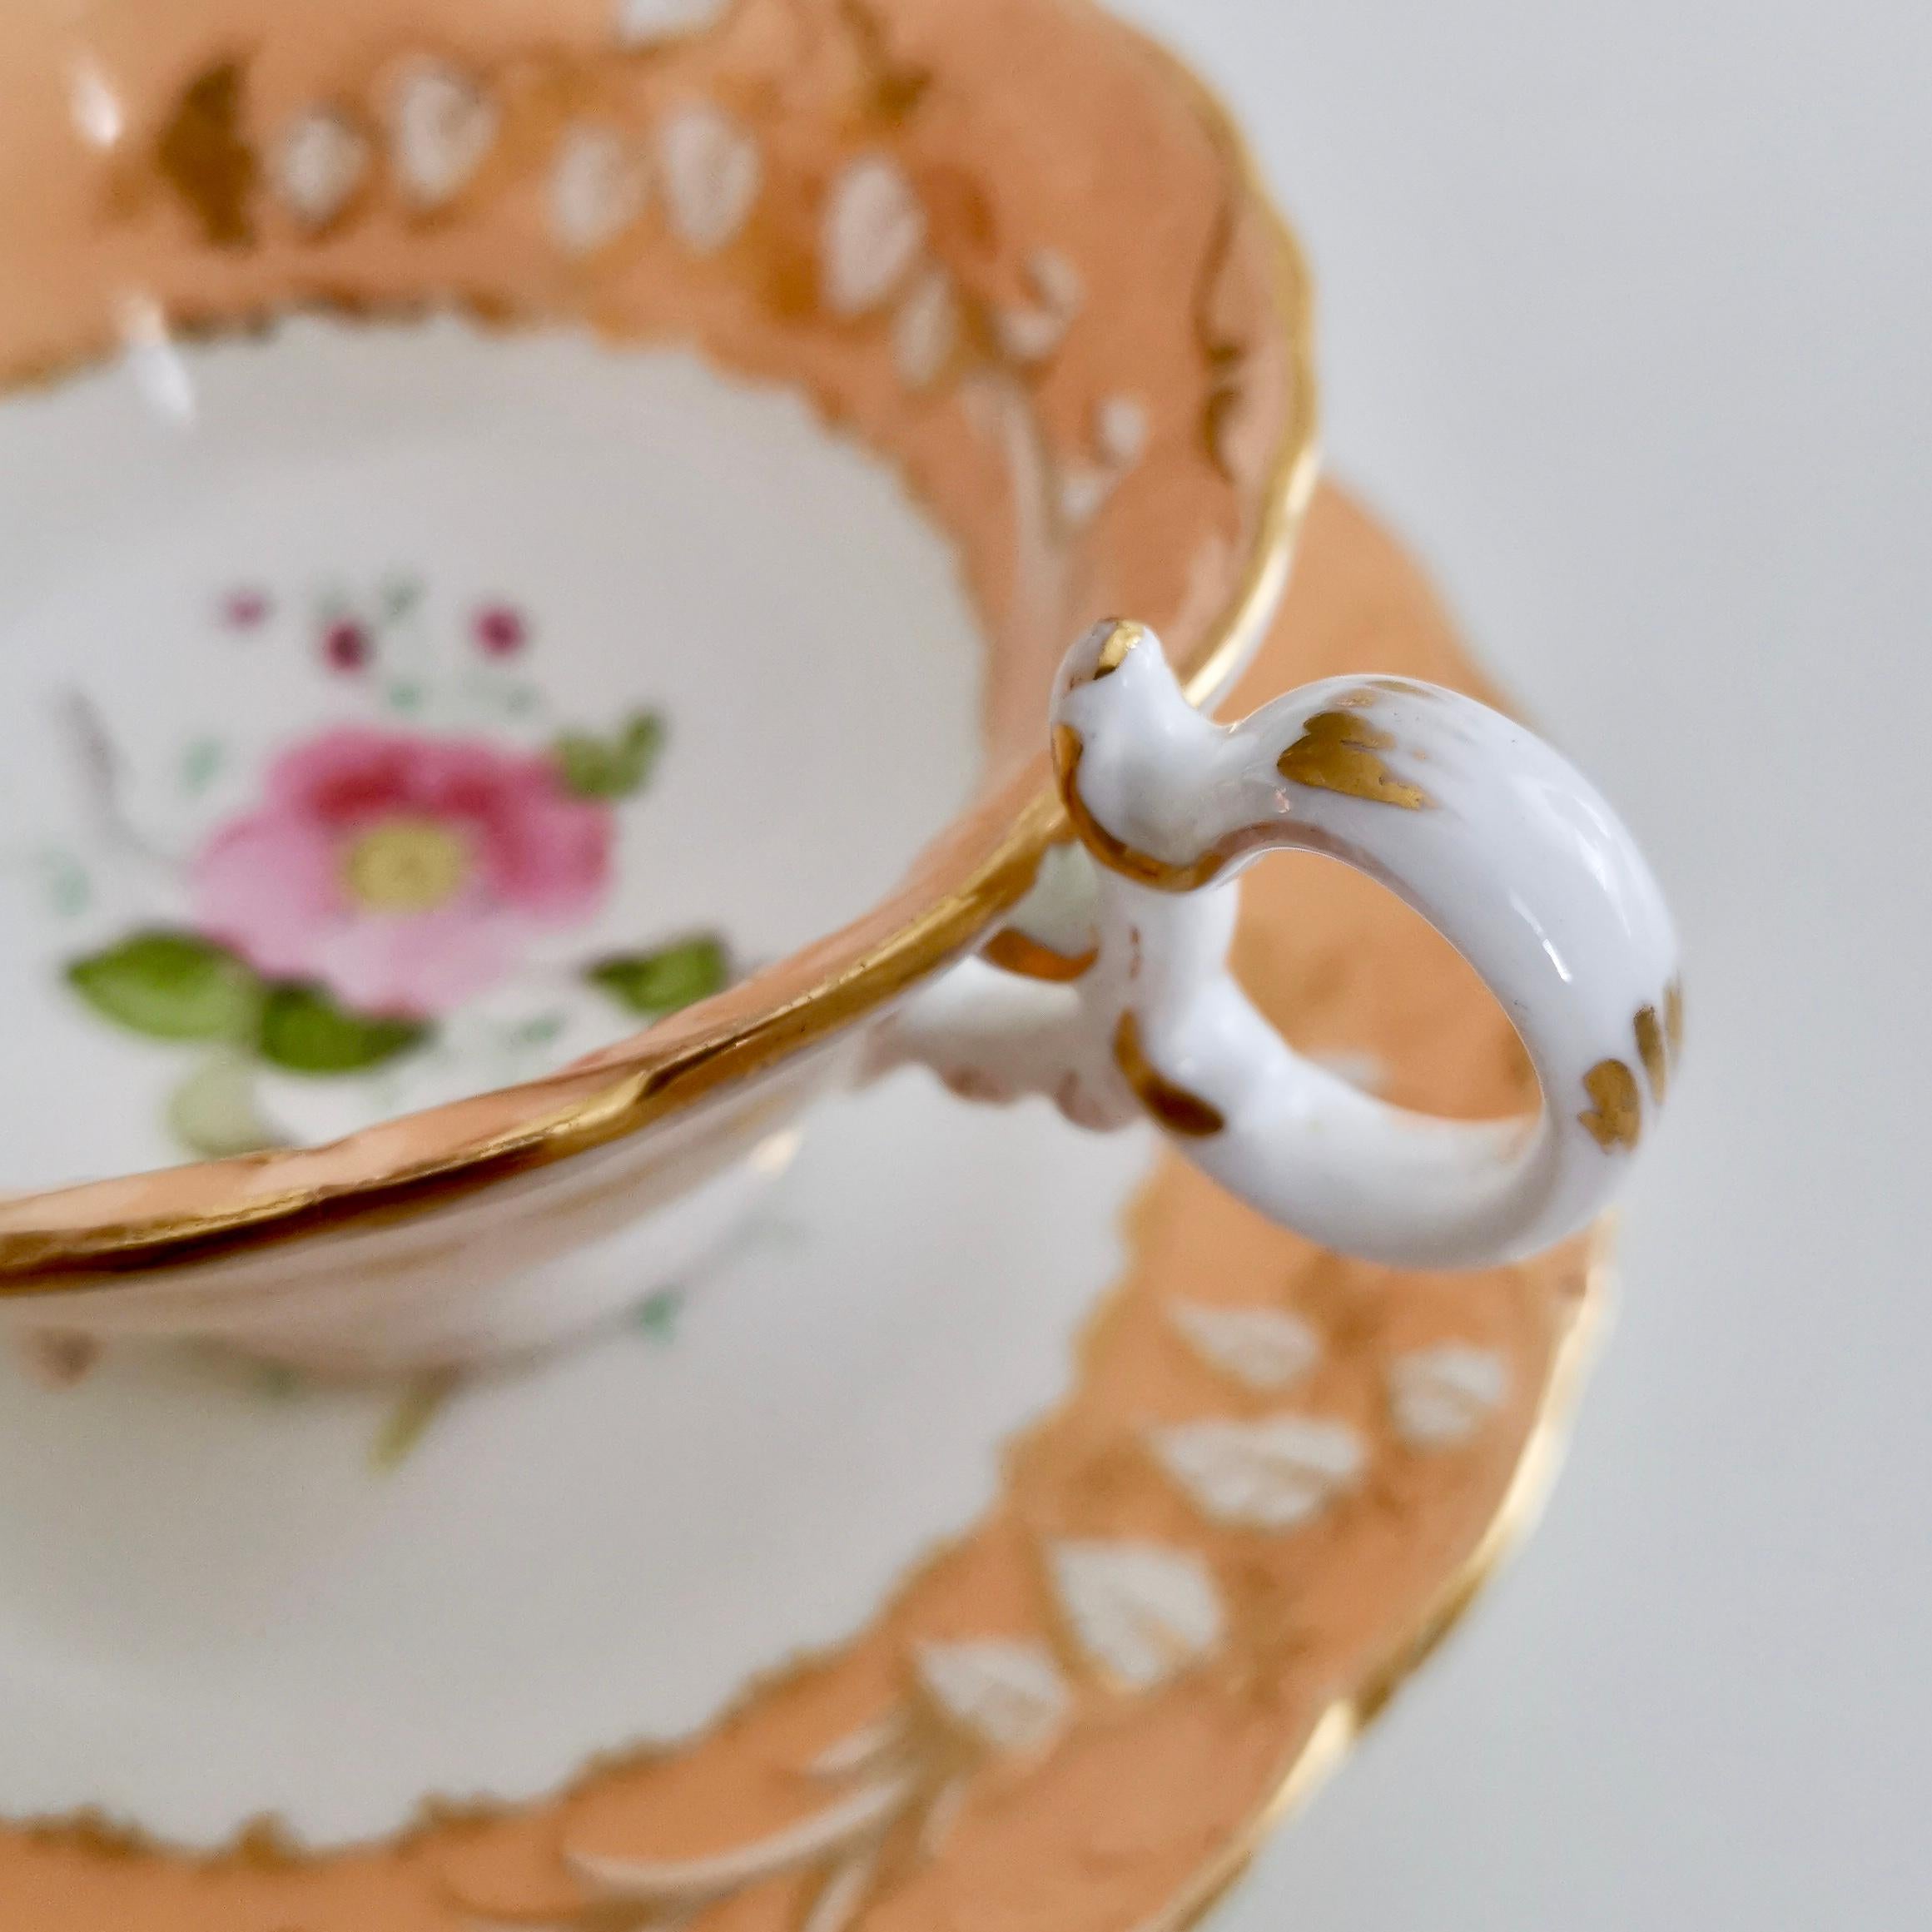 Coalport Teacup, Adelaide Shape, Peach-Colored with Roses, circa 1839 1